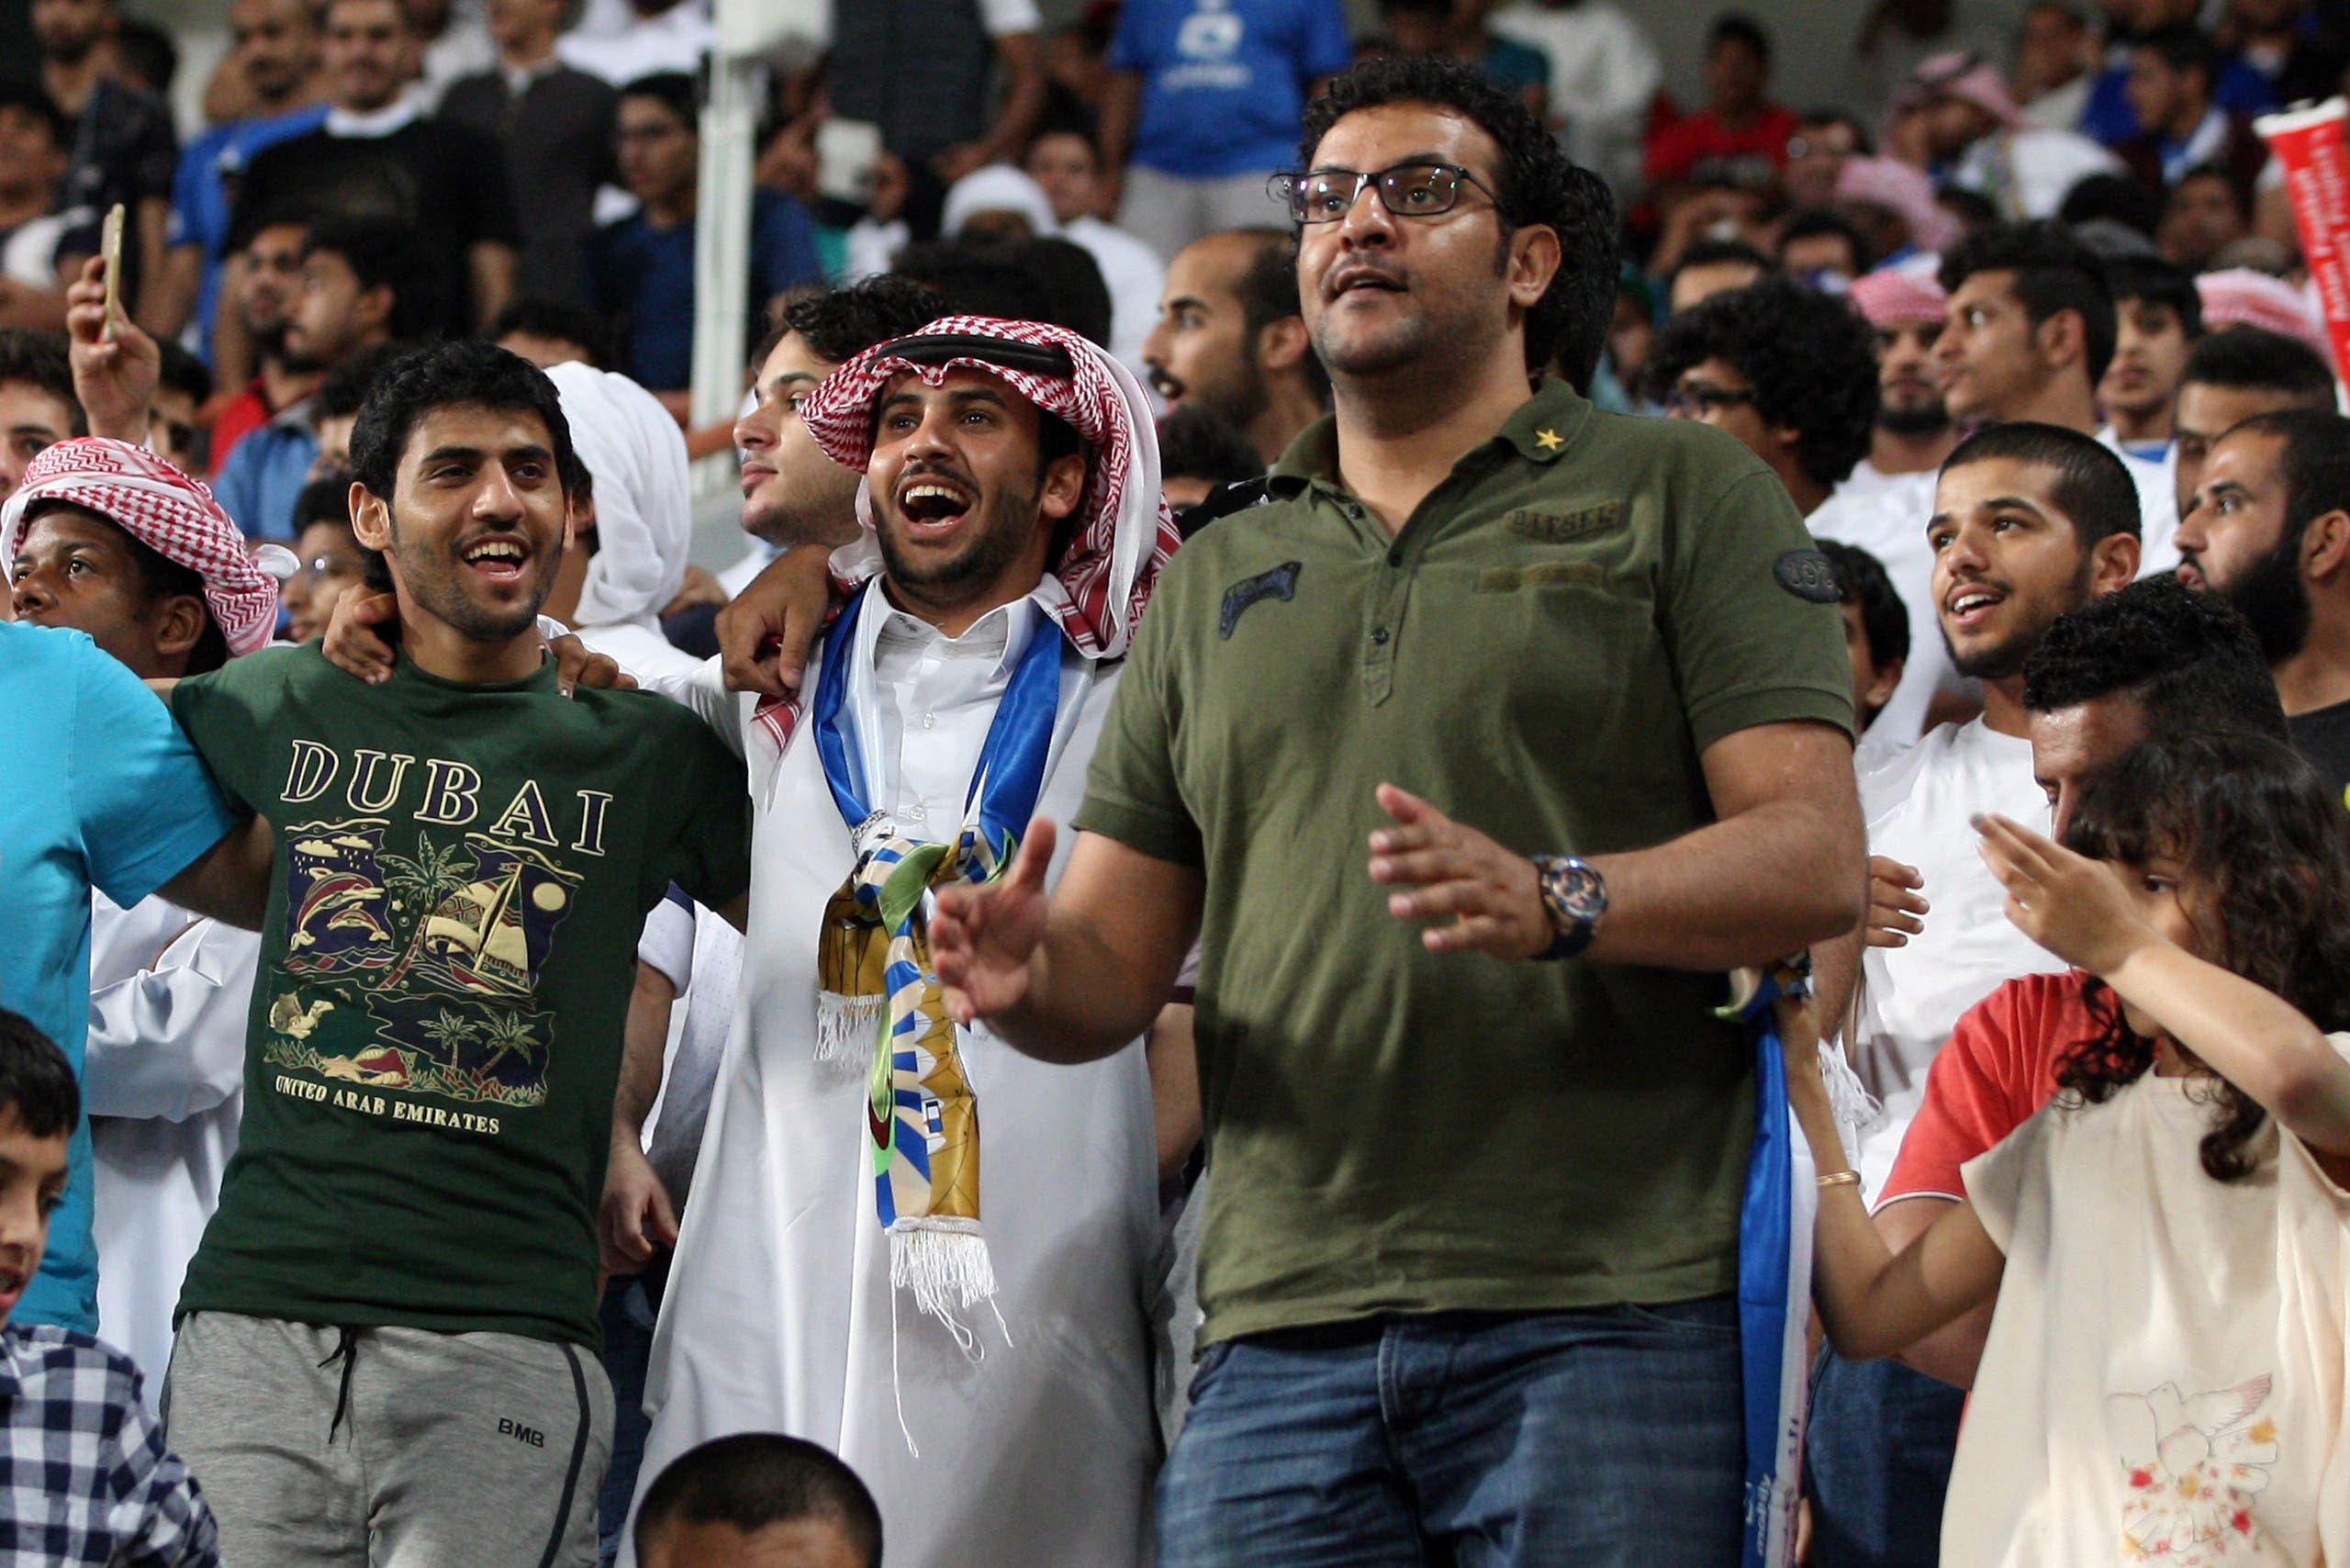 Supporters of Saudi club Al-Hilal cheer during an Asian Champions League group C football match against Emirati club Al-Jazira at Mohammed Bin Zayed Stadium on March 15, 2016 in Abu Dhabi. (AFP)